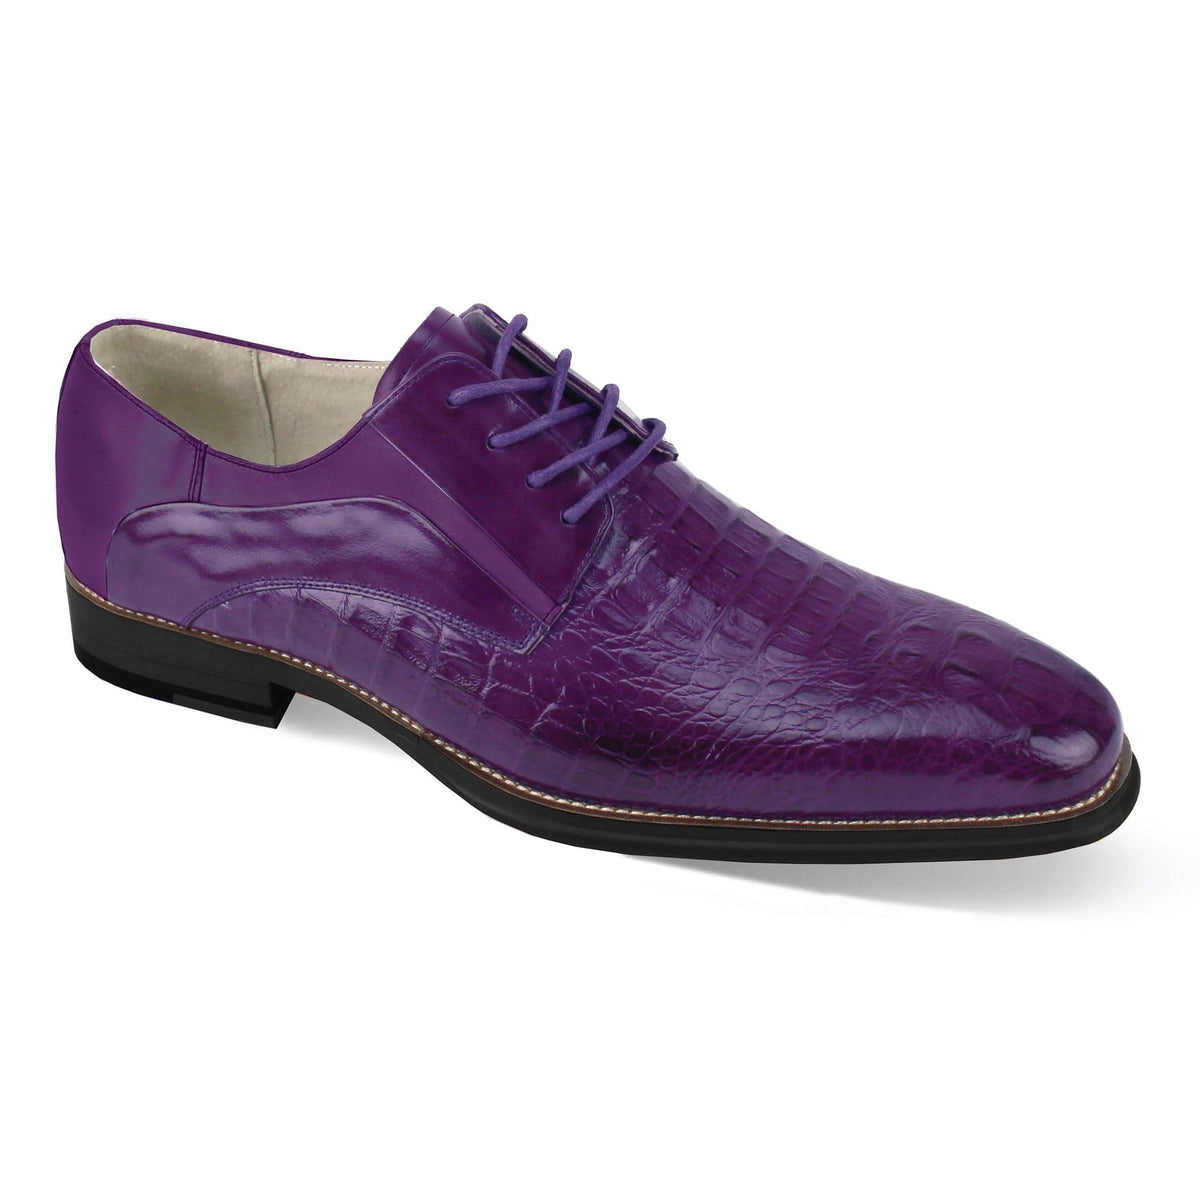 GIOVANNI LEATHER SHOES FT PURPLE / 7 GIOVANNI LEATHER SHOES-MASON-PINK